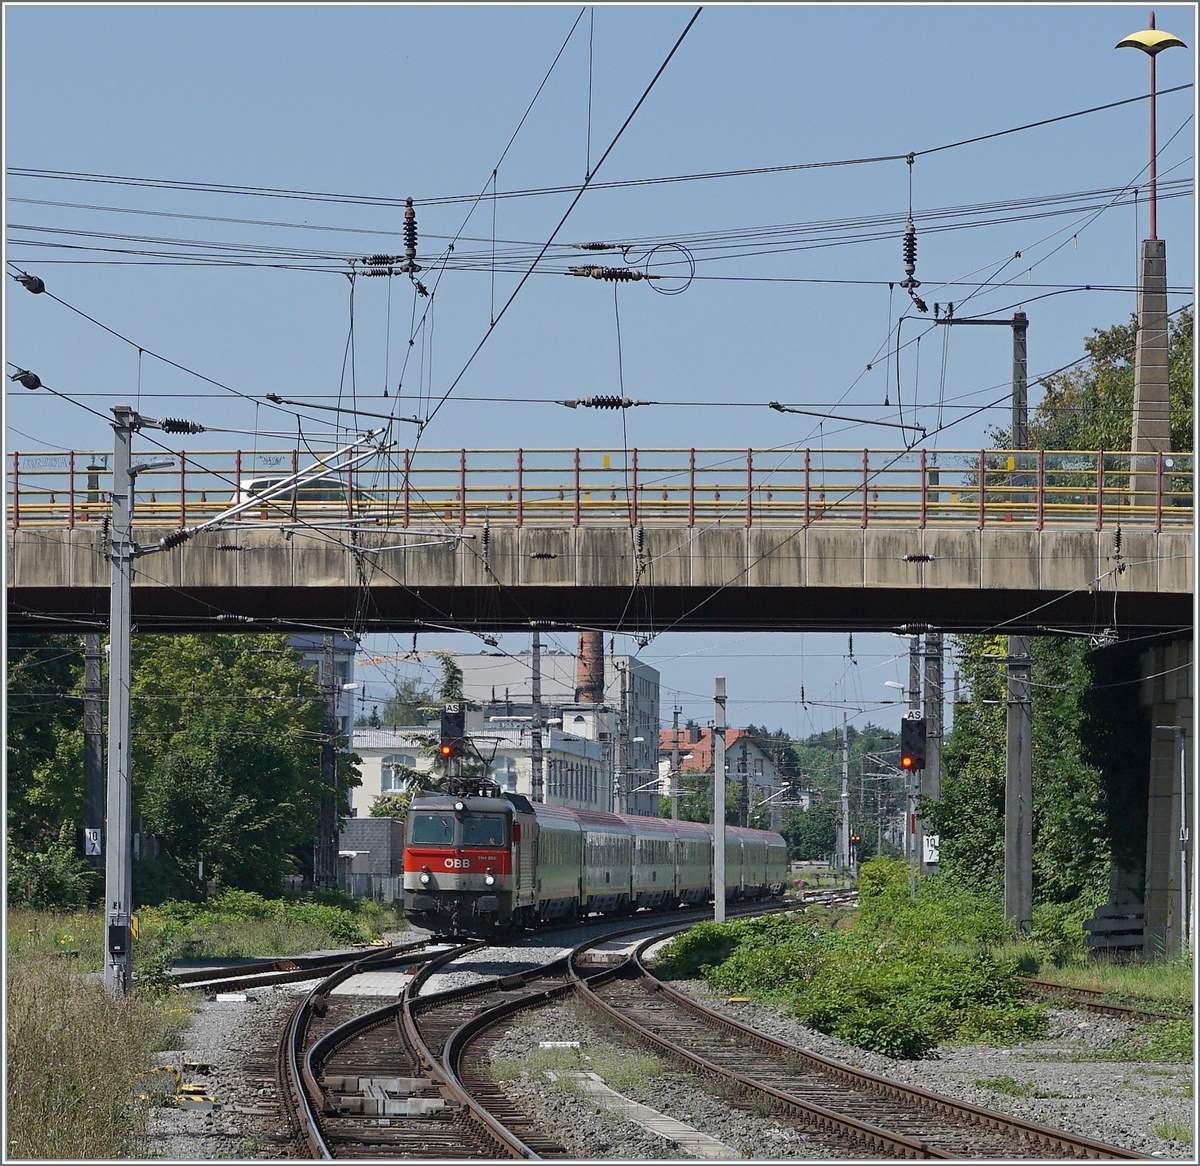 The ÖBB 1144 with his IC 118  Bodensee  is arriving at Bregenz. 

14.08.2021